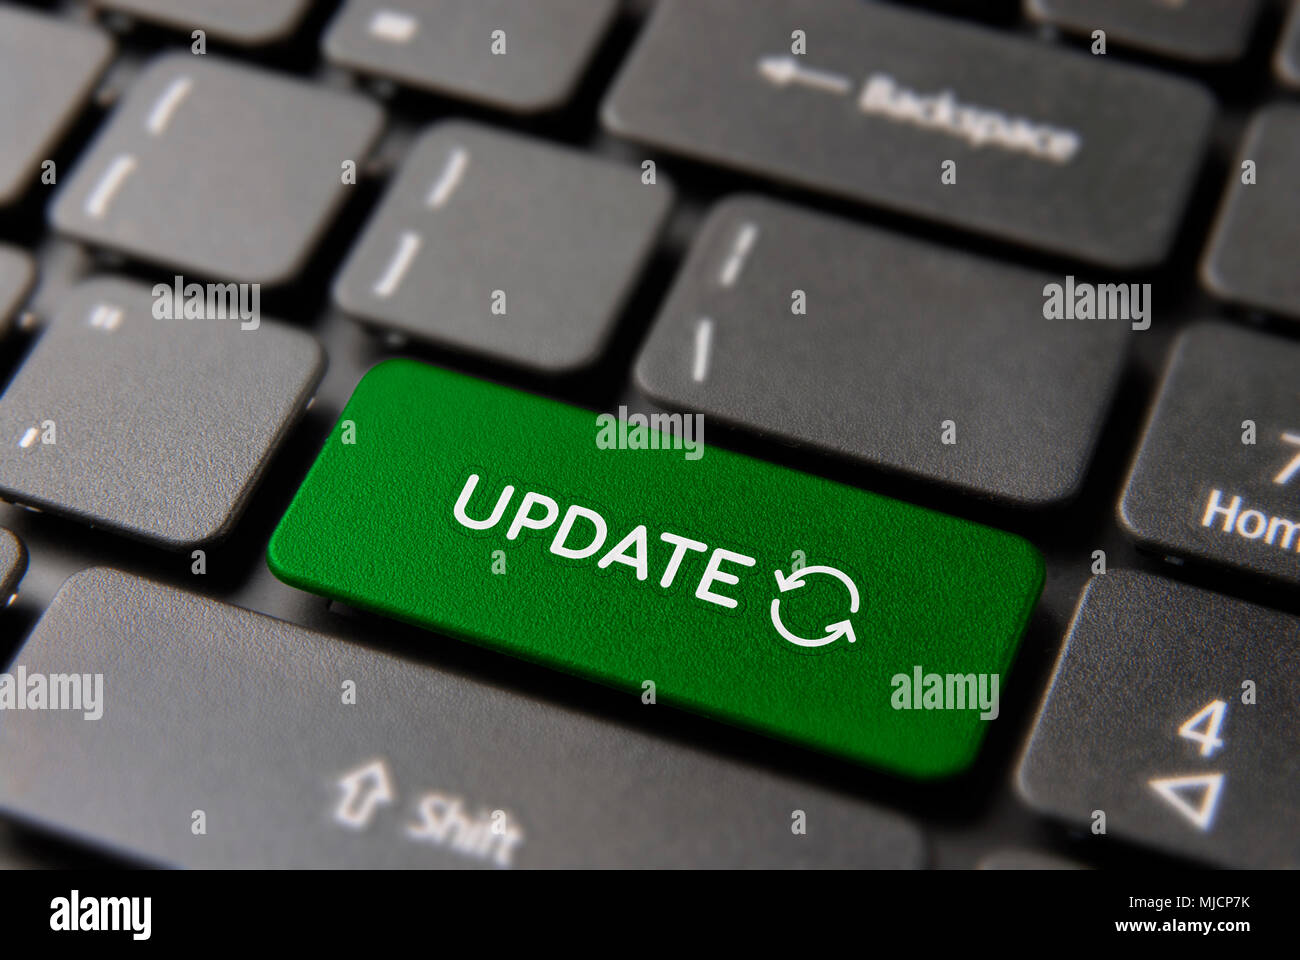 Online computer update concept: green key button with updating process symbol on laptop keyboard. Stock Photo